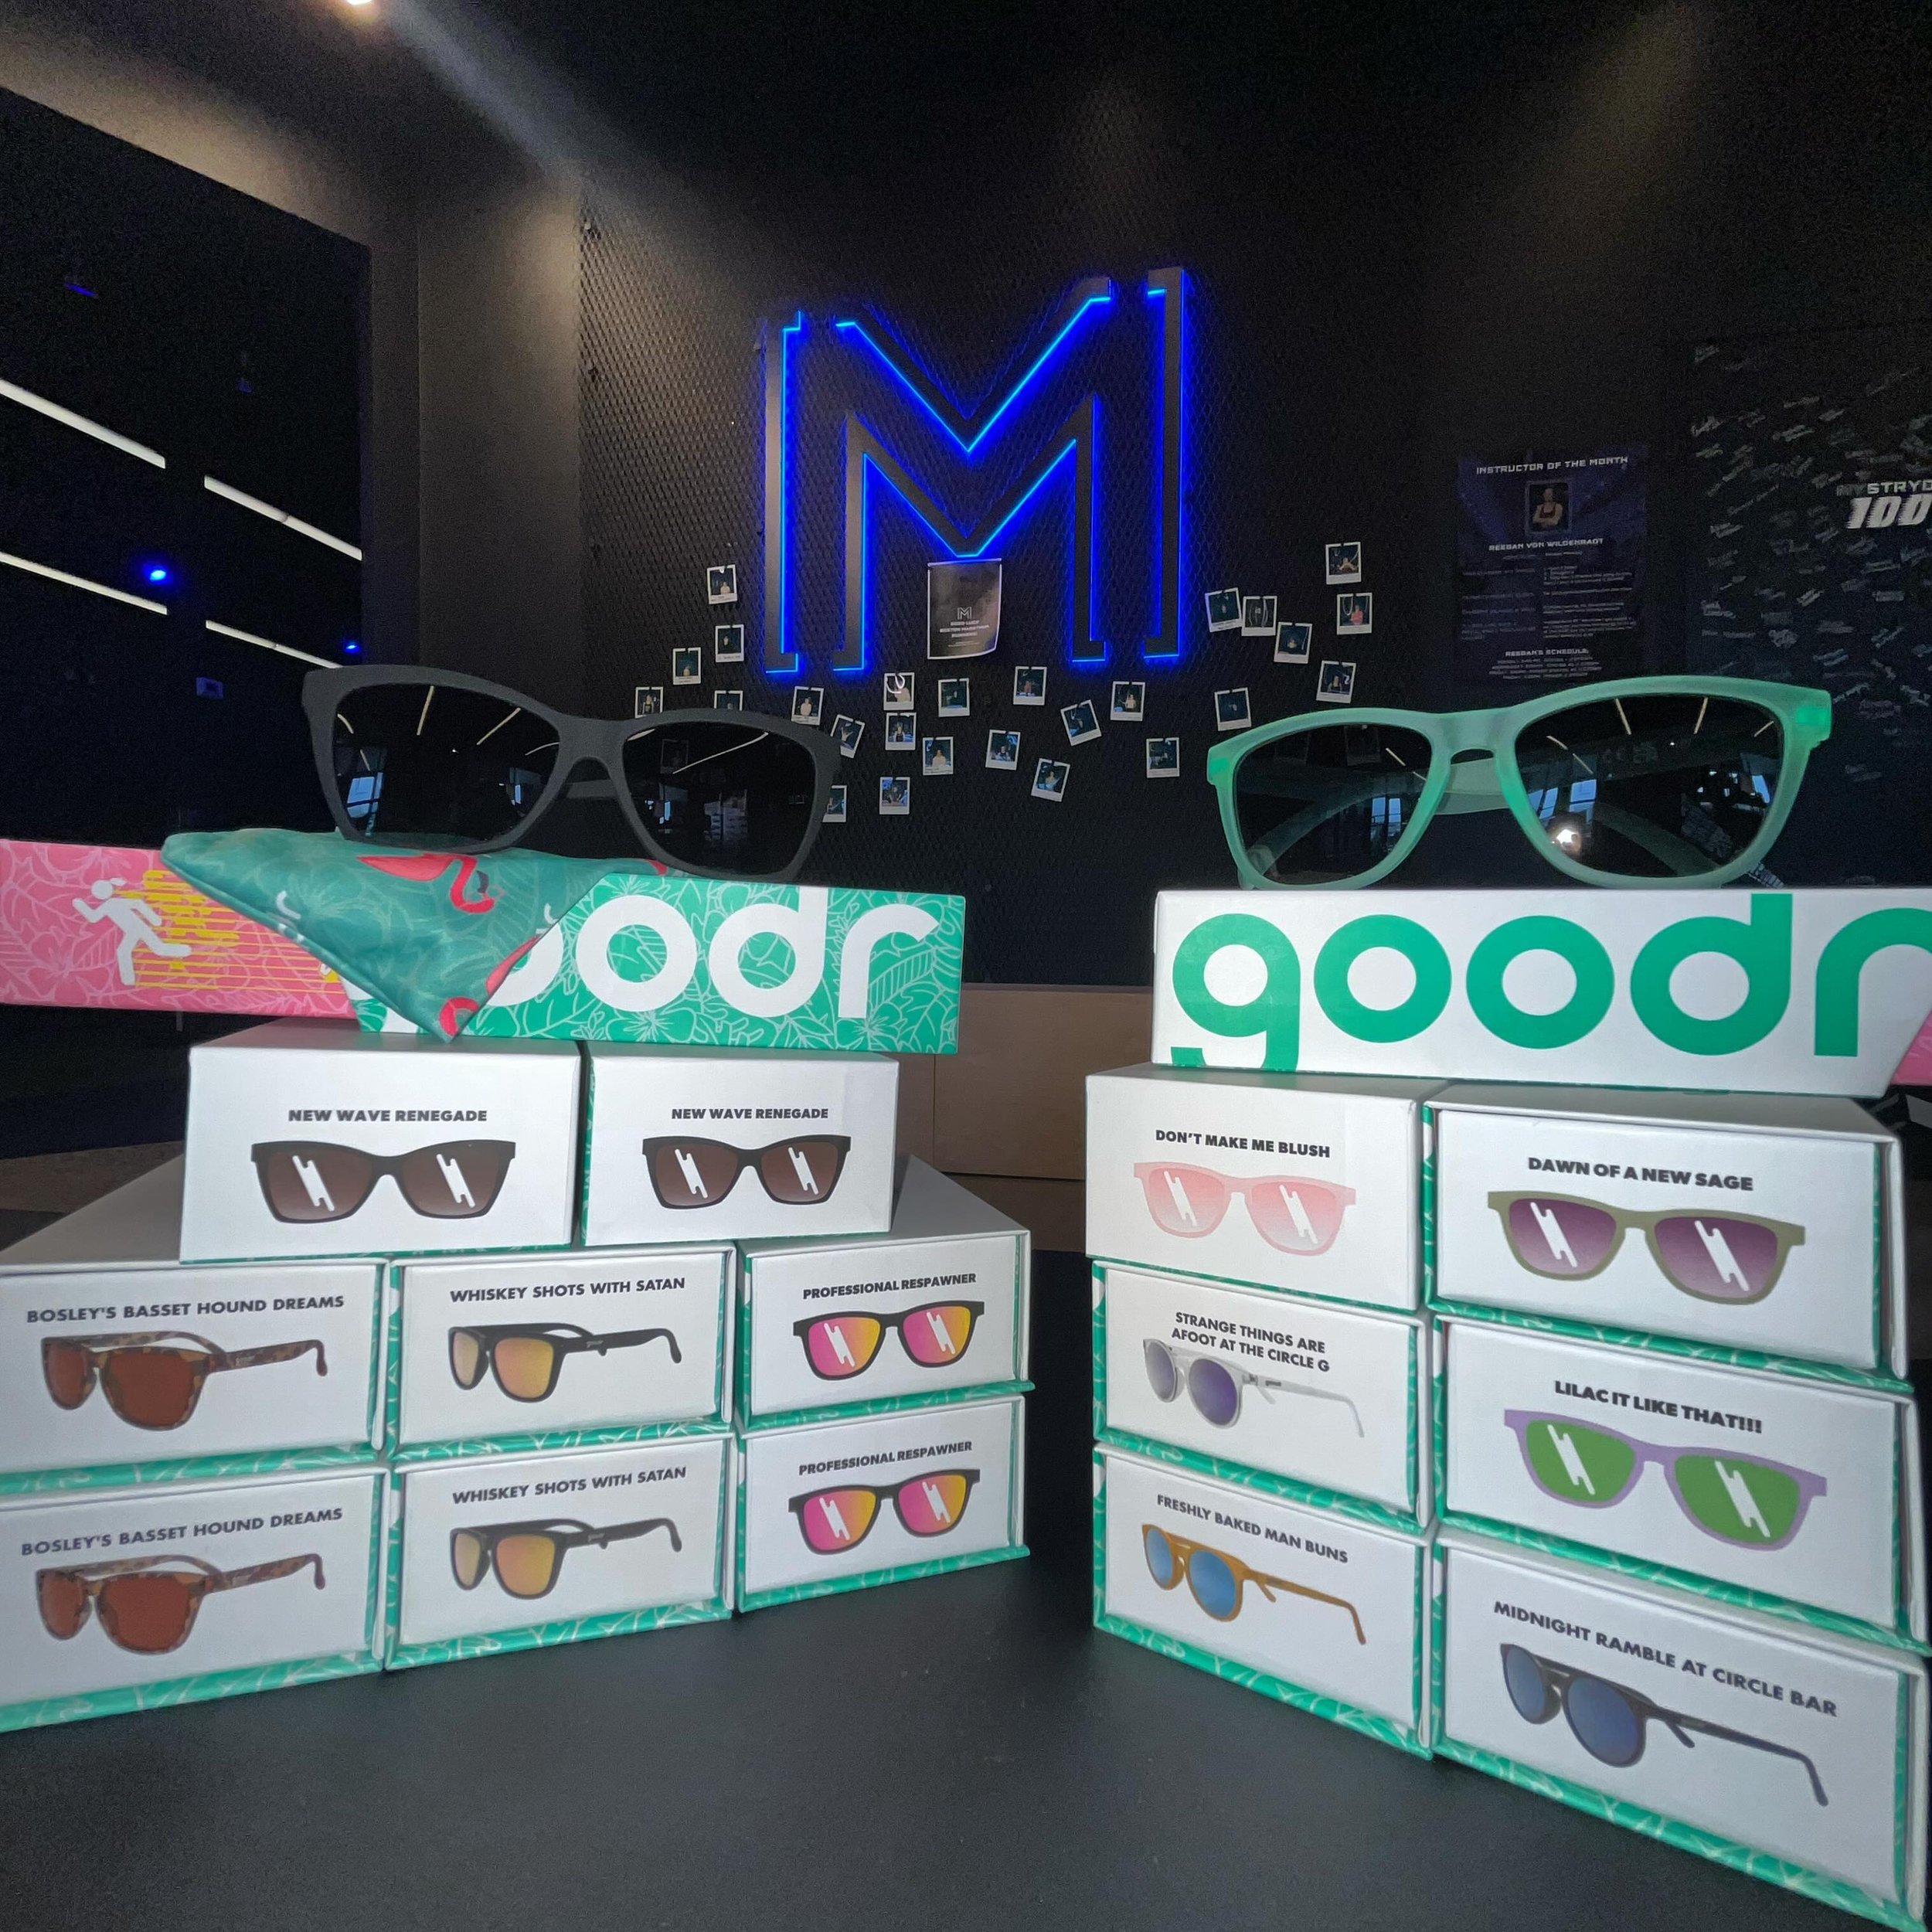 Spring has sprung, the sun is out, &amp; we&rsquo;ve restocked new @goodr sunglasses so you&rsquo;re prepared! Grab a pair at either location!